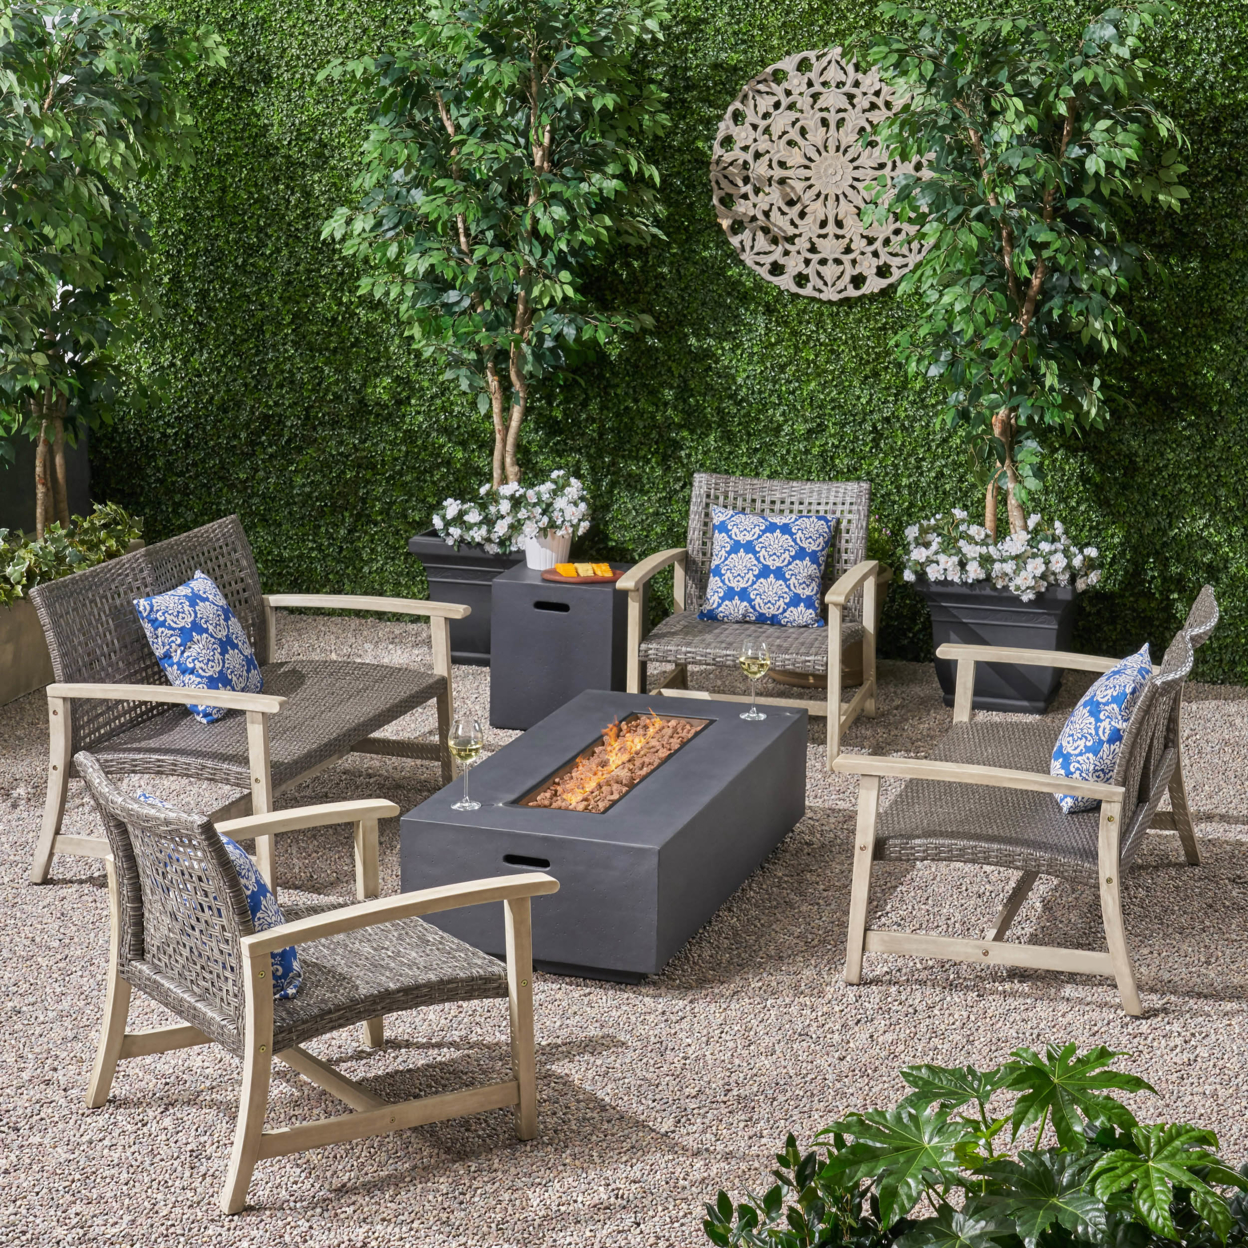 Augusta Outdoor 6 Piece Wood And Wicker Chat Set With Fire Pit - Mixed Black, Light Gray Washed Finish